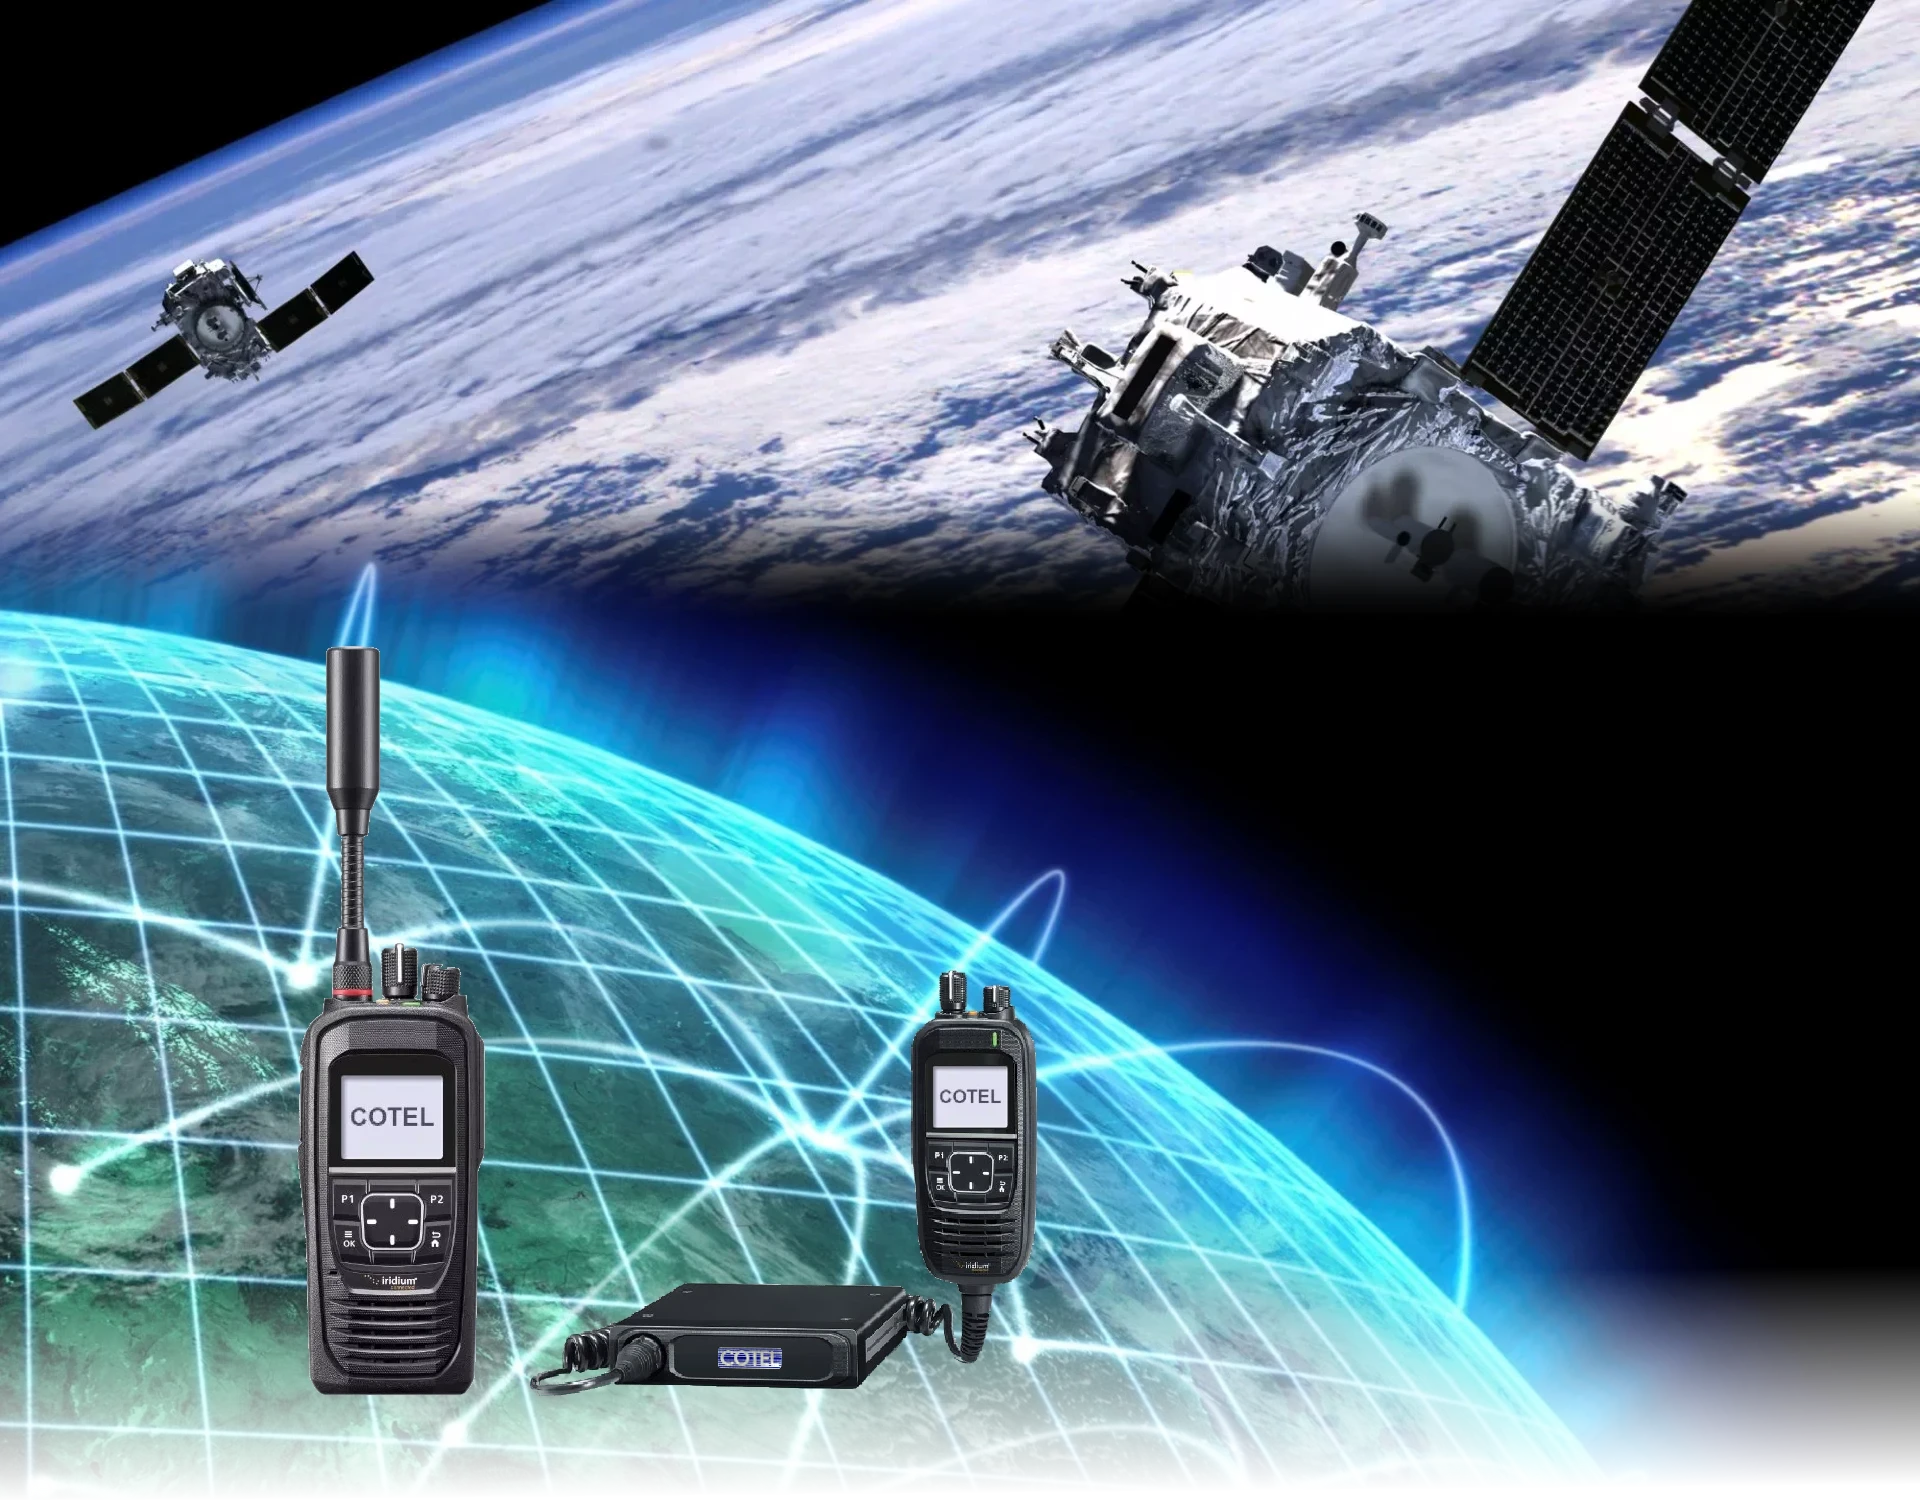 Satellite Technology opens the door for communications in remote areas where no other service is available. Business can benefit from this  by using satellite phone technology, allowing contact with lower latency in calls and faster data rates.